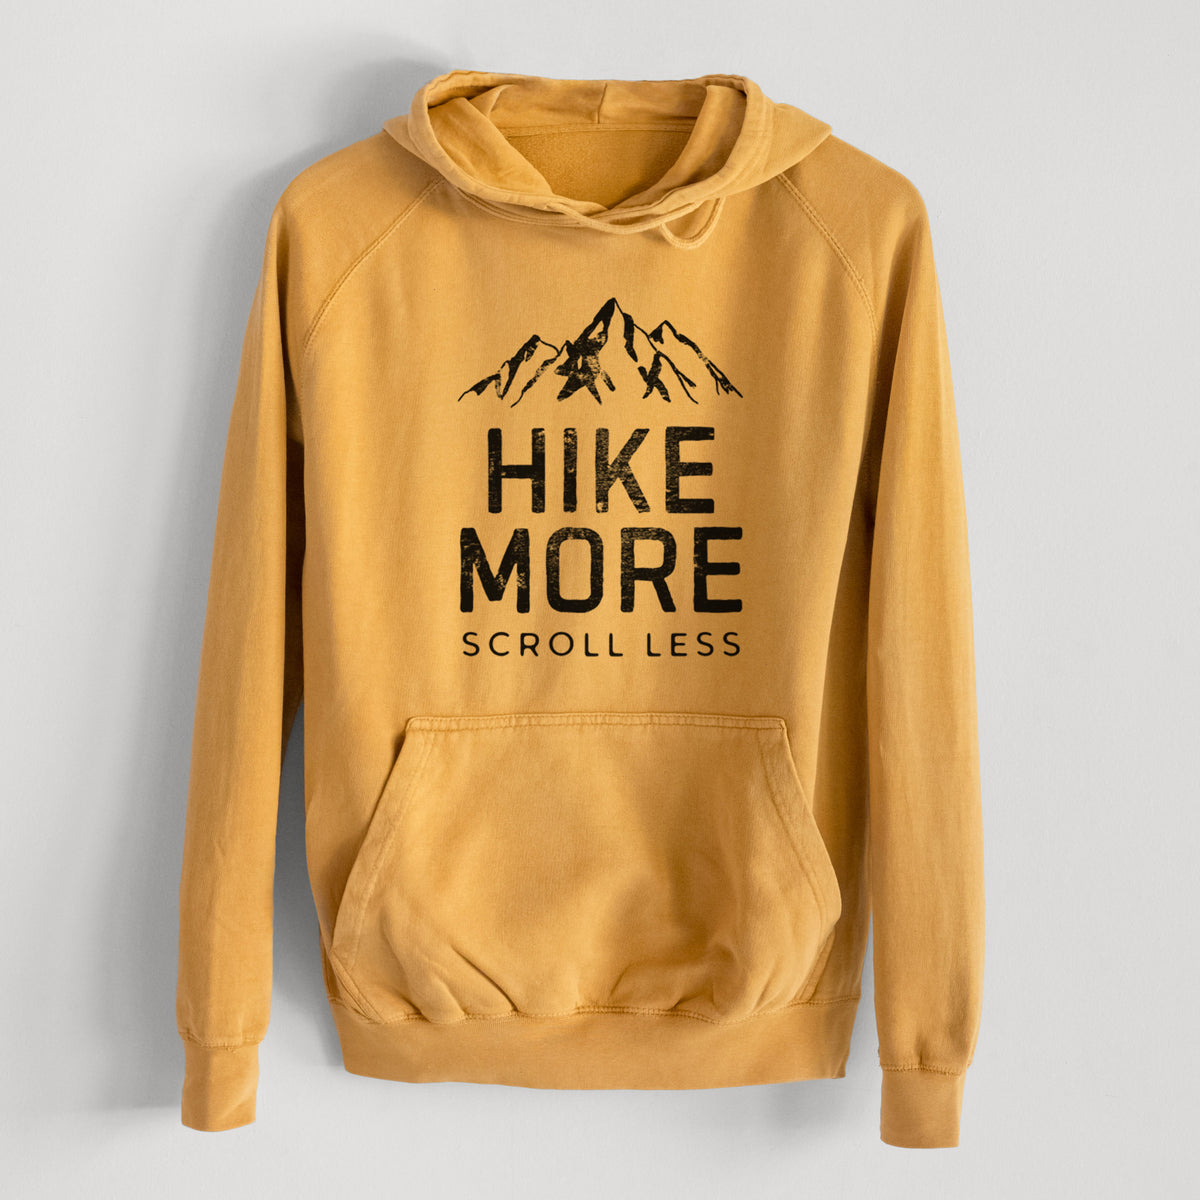 Hike More - Scroll Less  - Mid-Weight Unisex Vintage 100% Cotton Hoodie